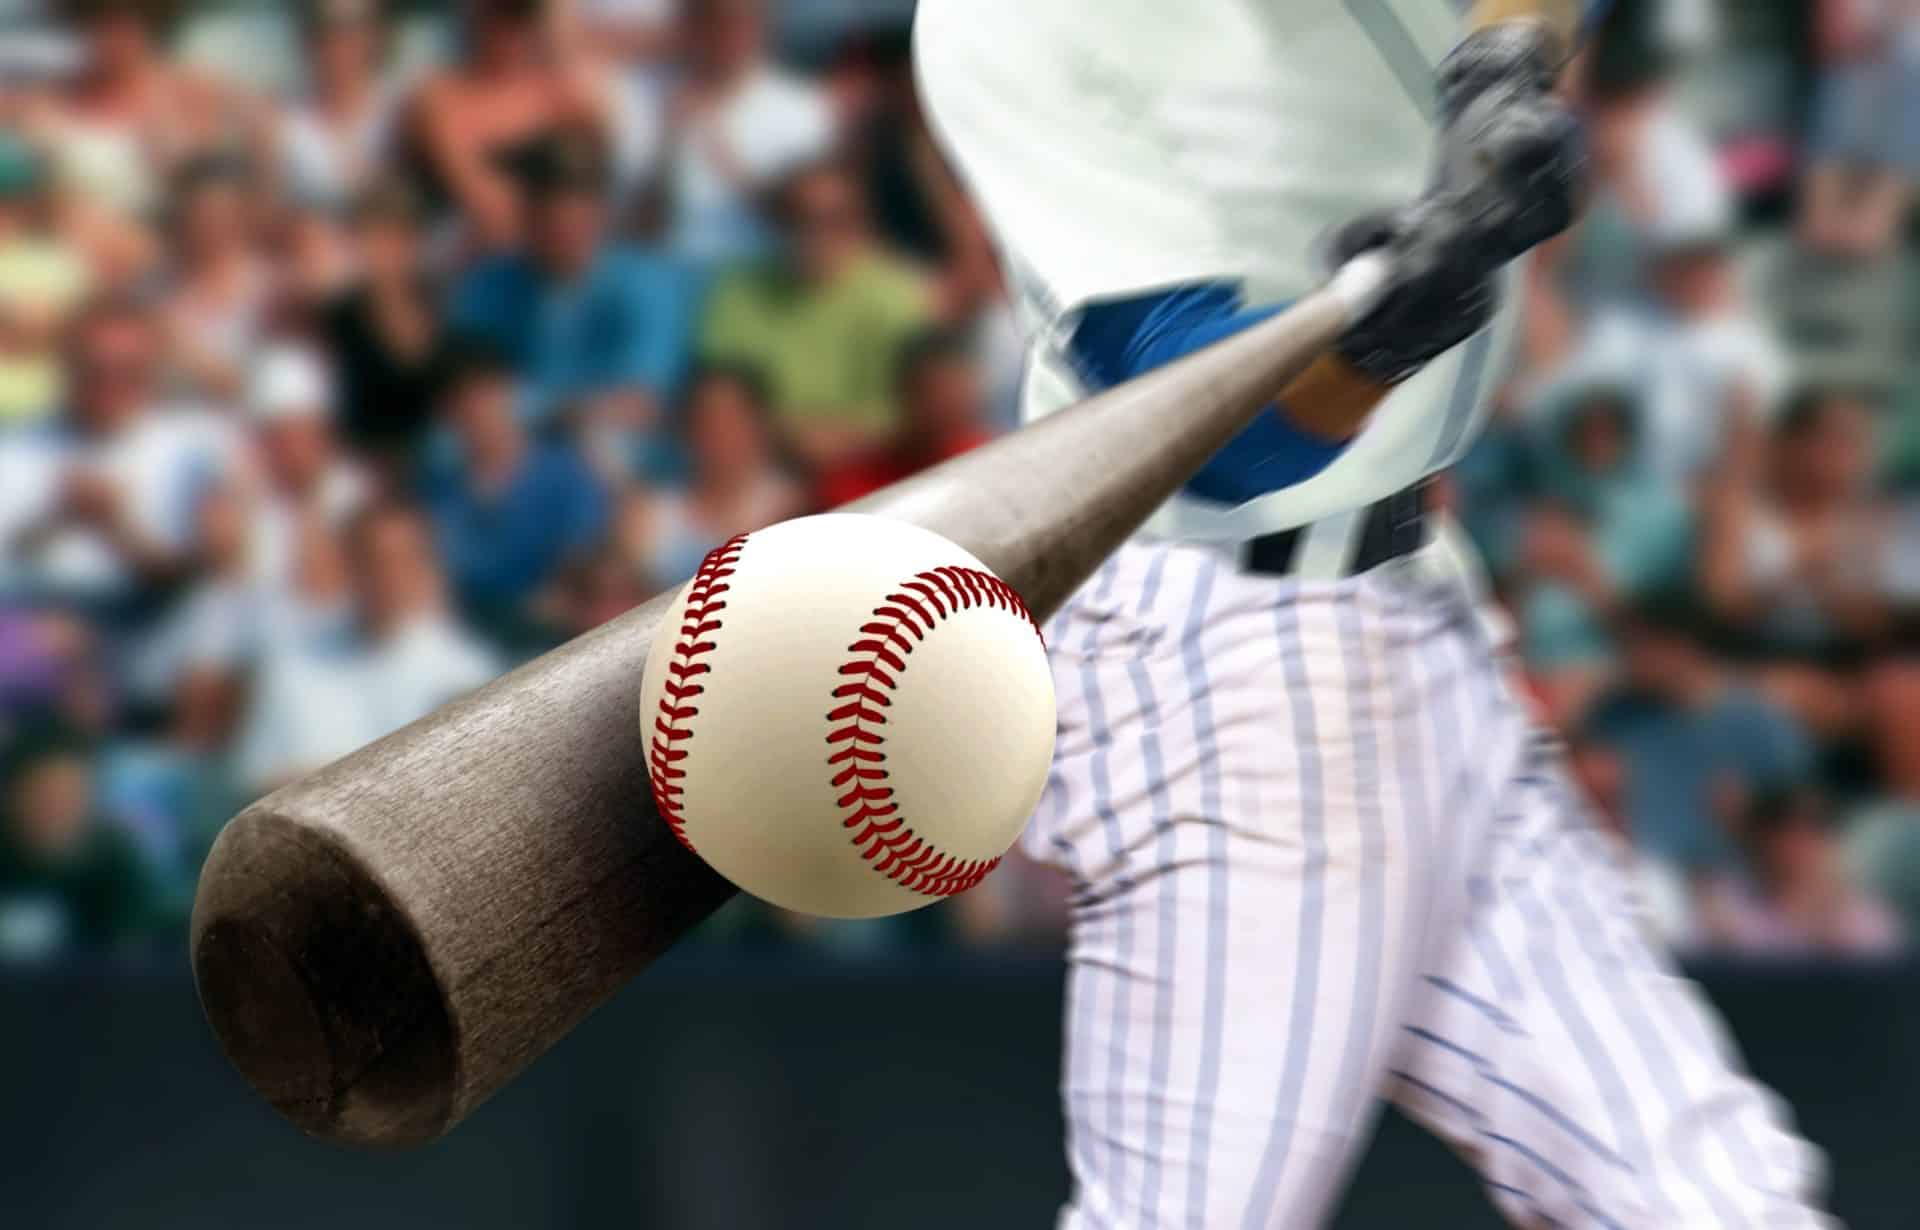 Get Hurt at a NY Baseball Game? Know Your Rights